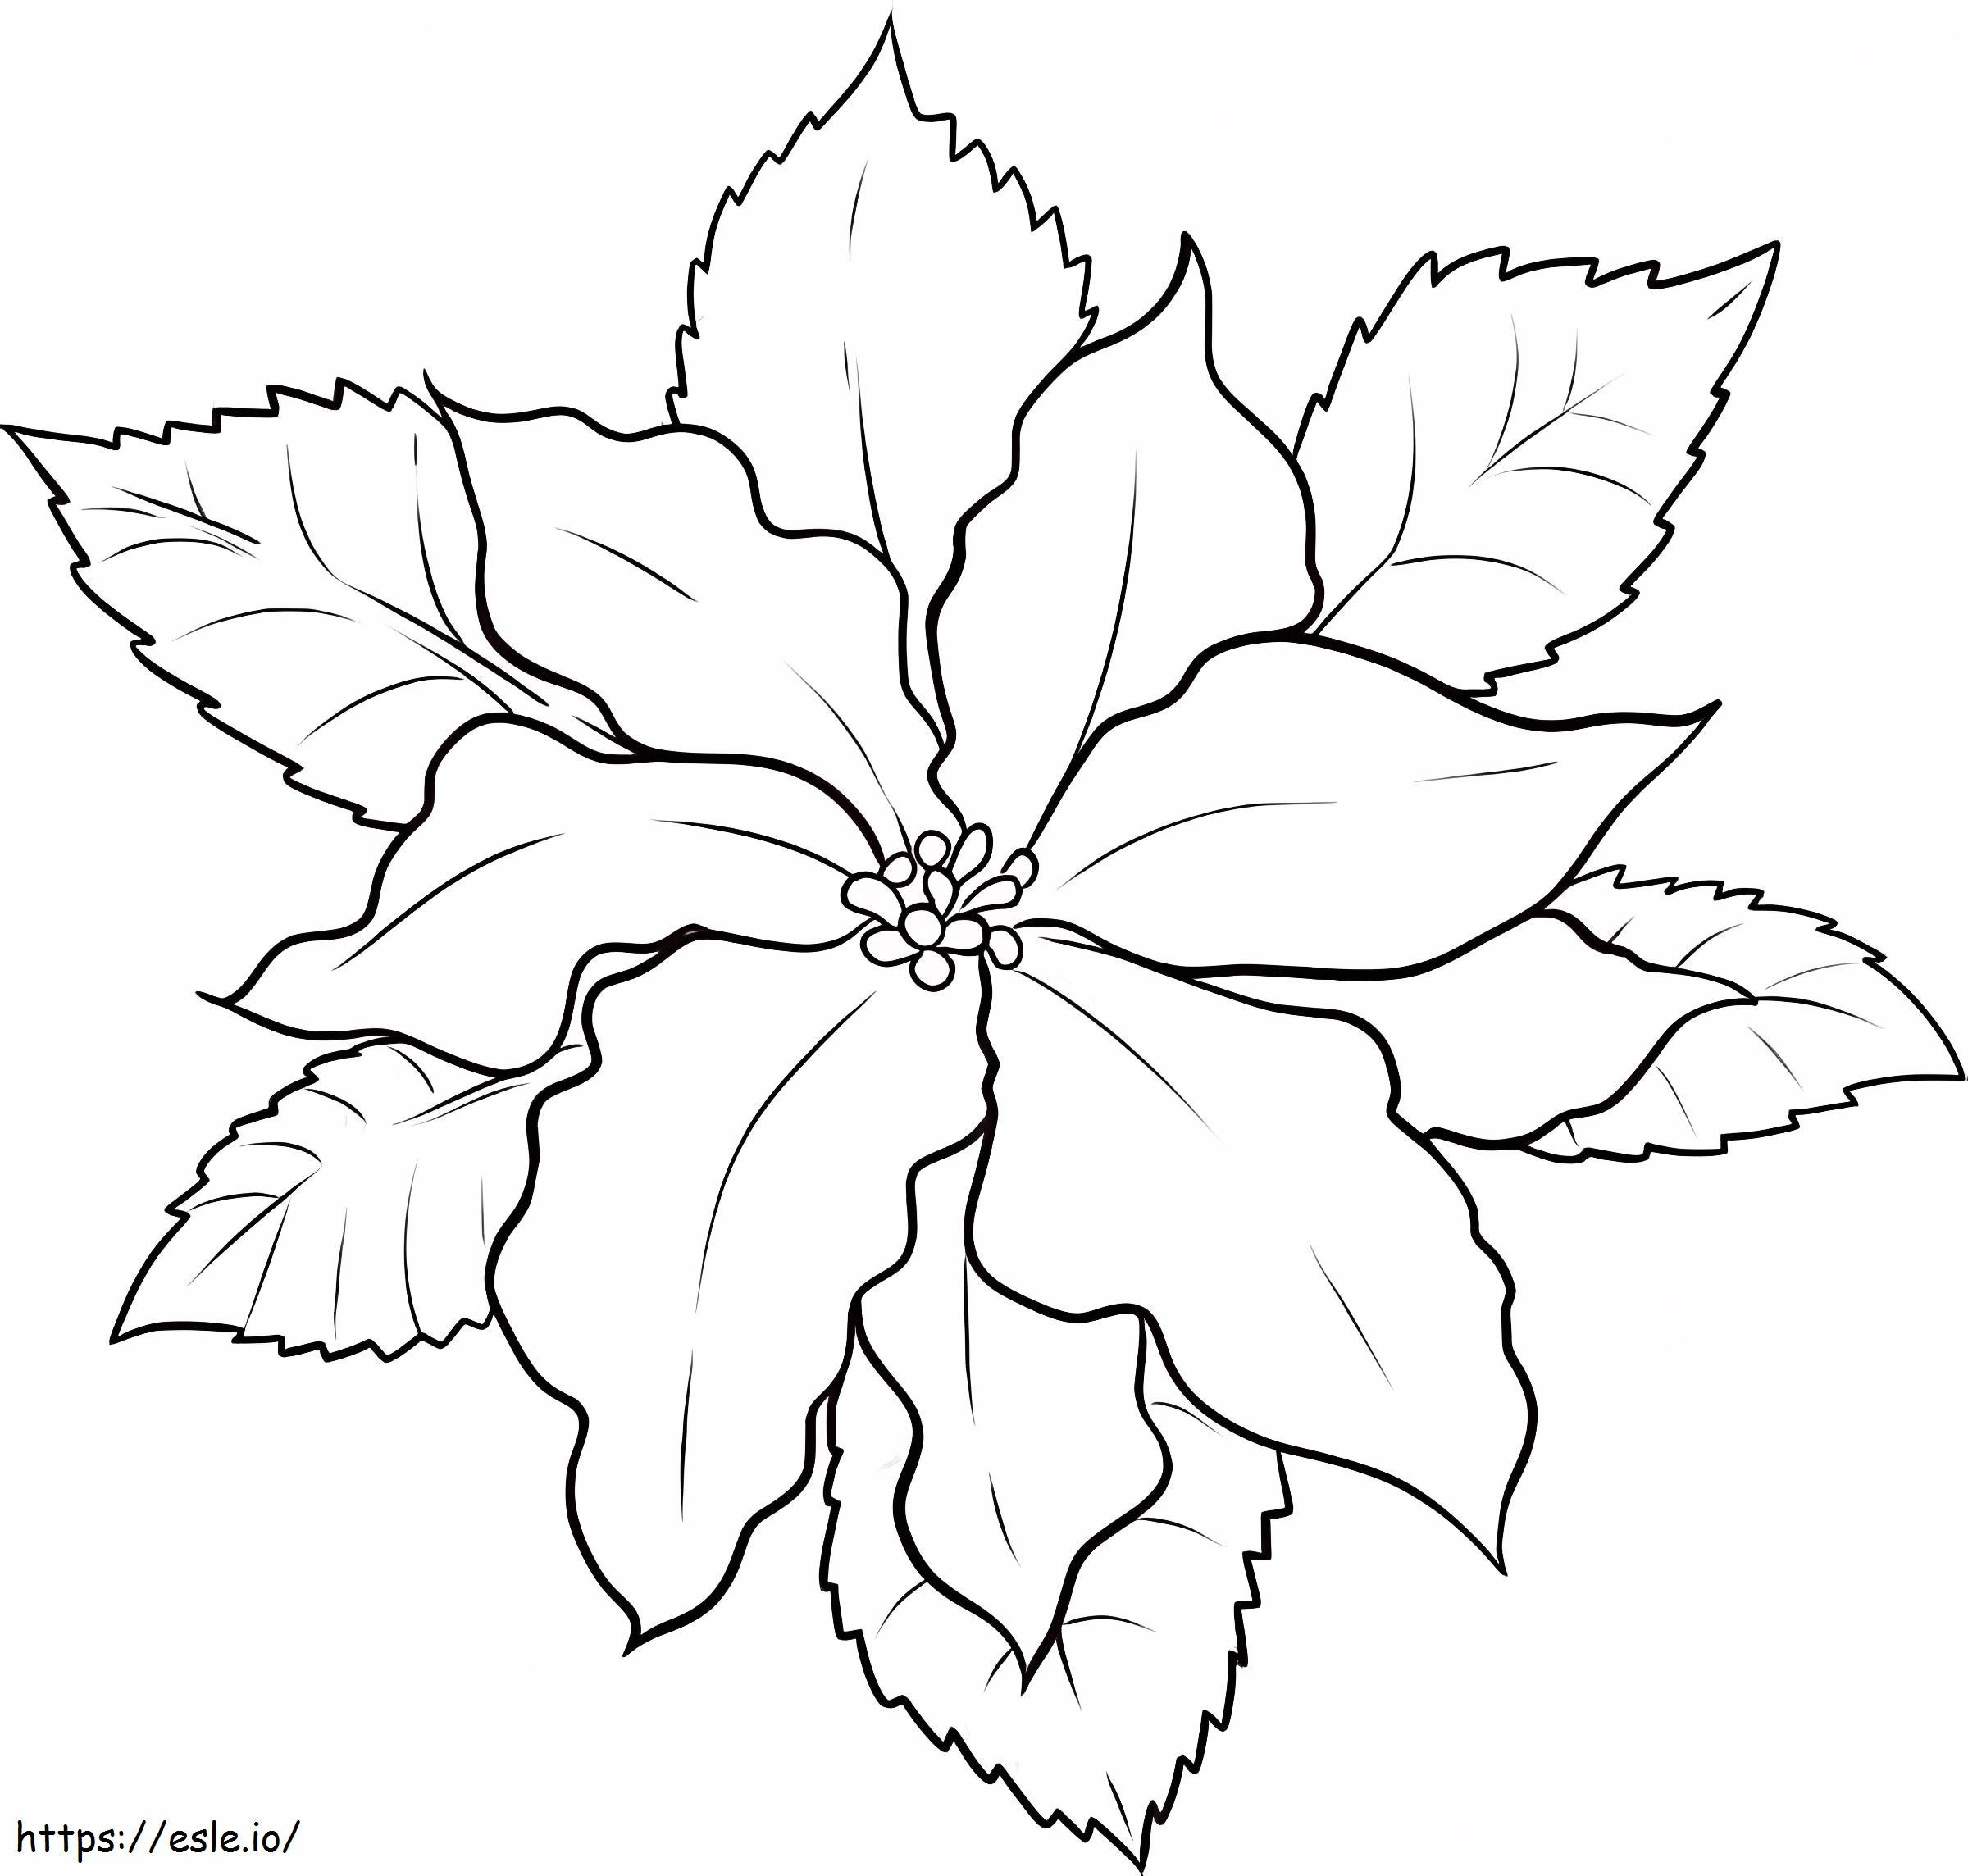 Fresh Poinsettia coloring page